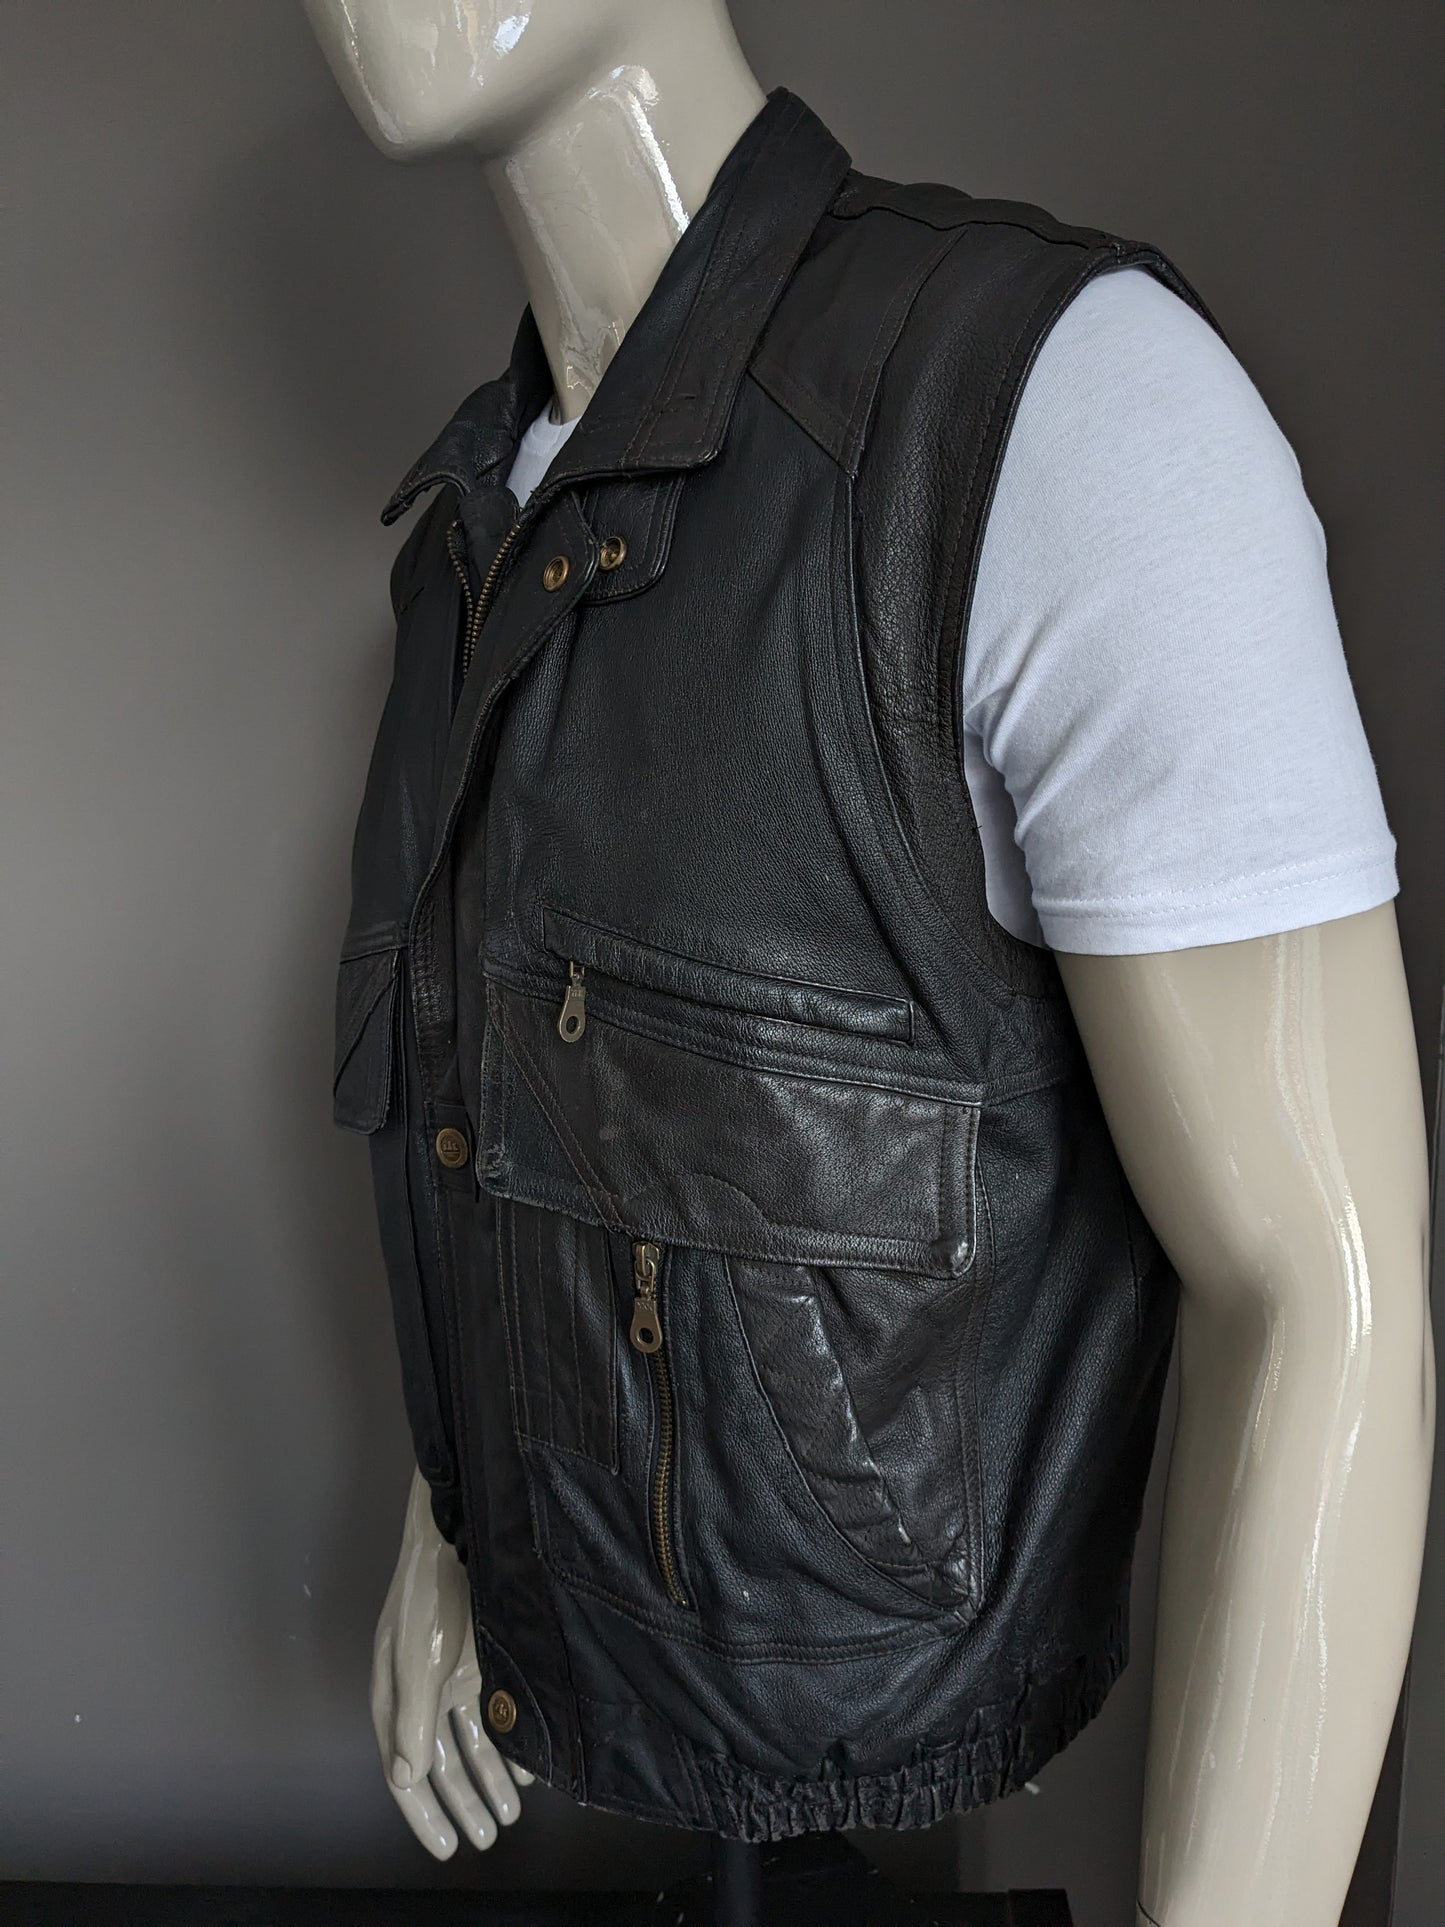 Henry Morrel Vintage Leather Body Warmer / waistcoat with double closure. Black. Size XL / XXL.